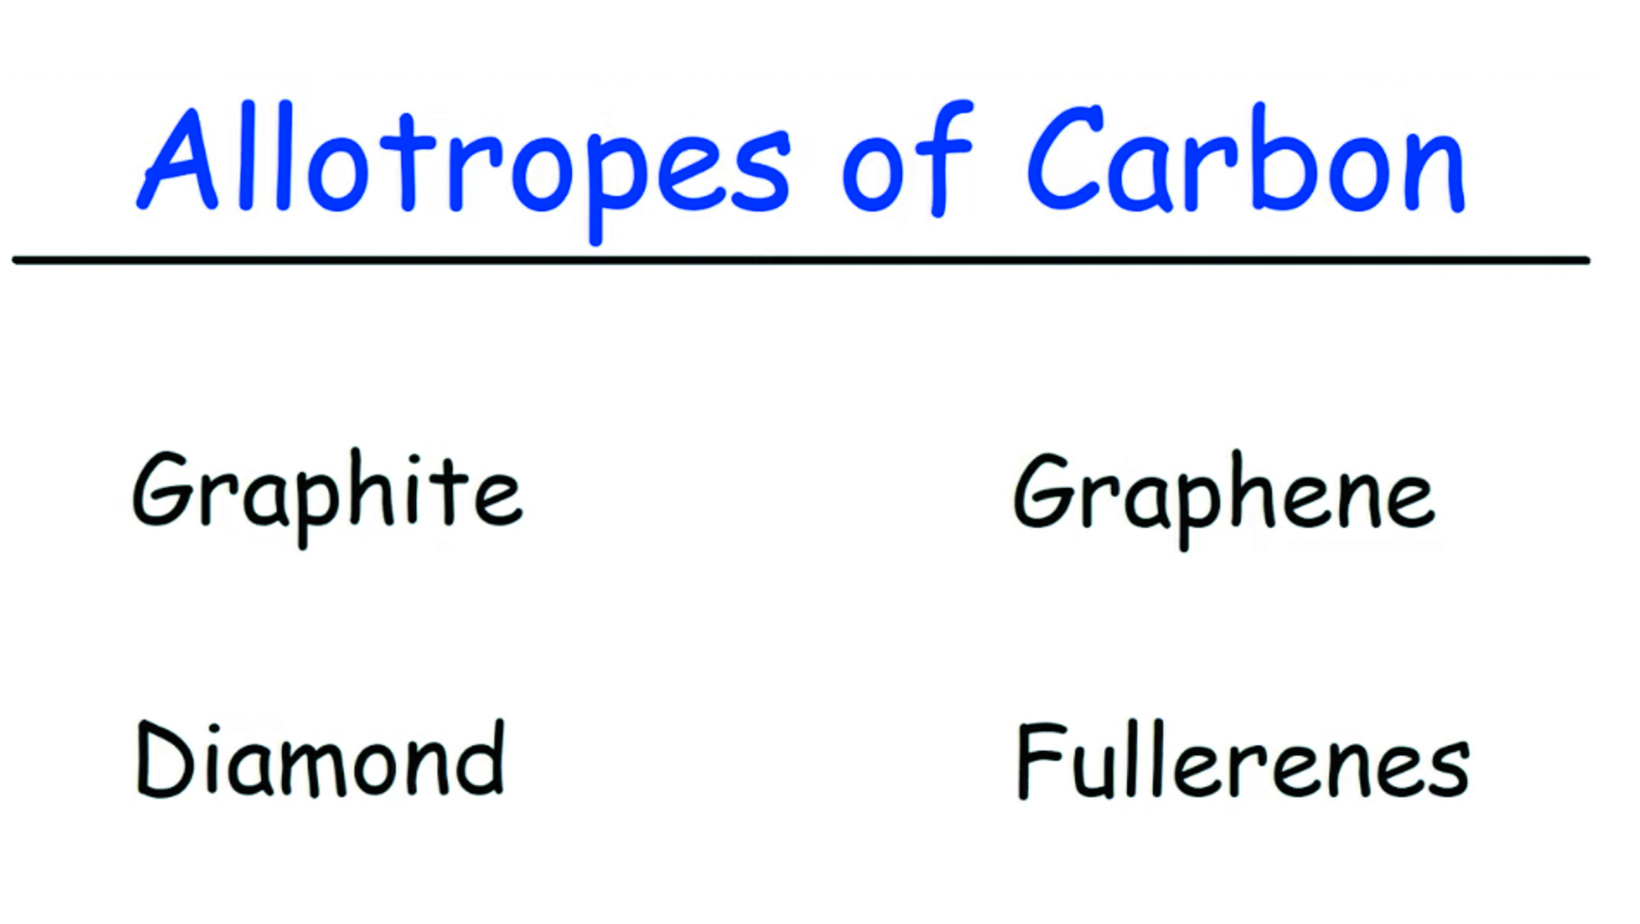 Allotropes of Carbon